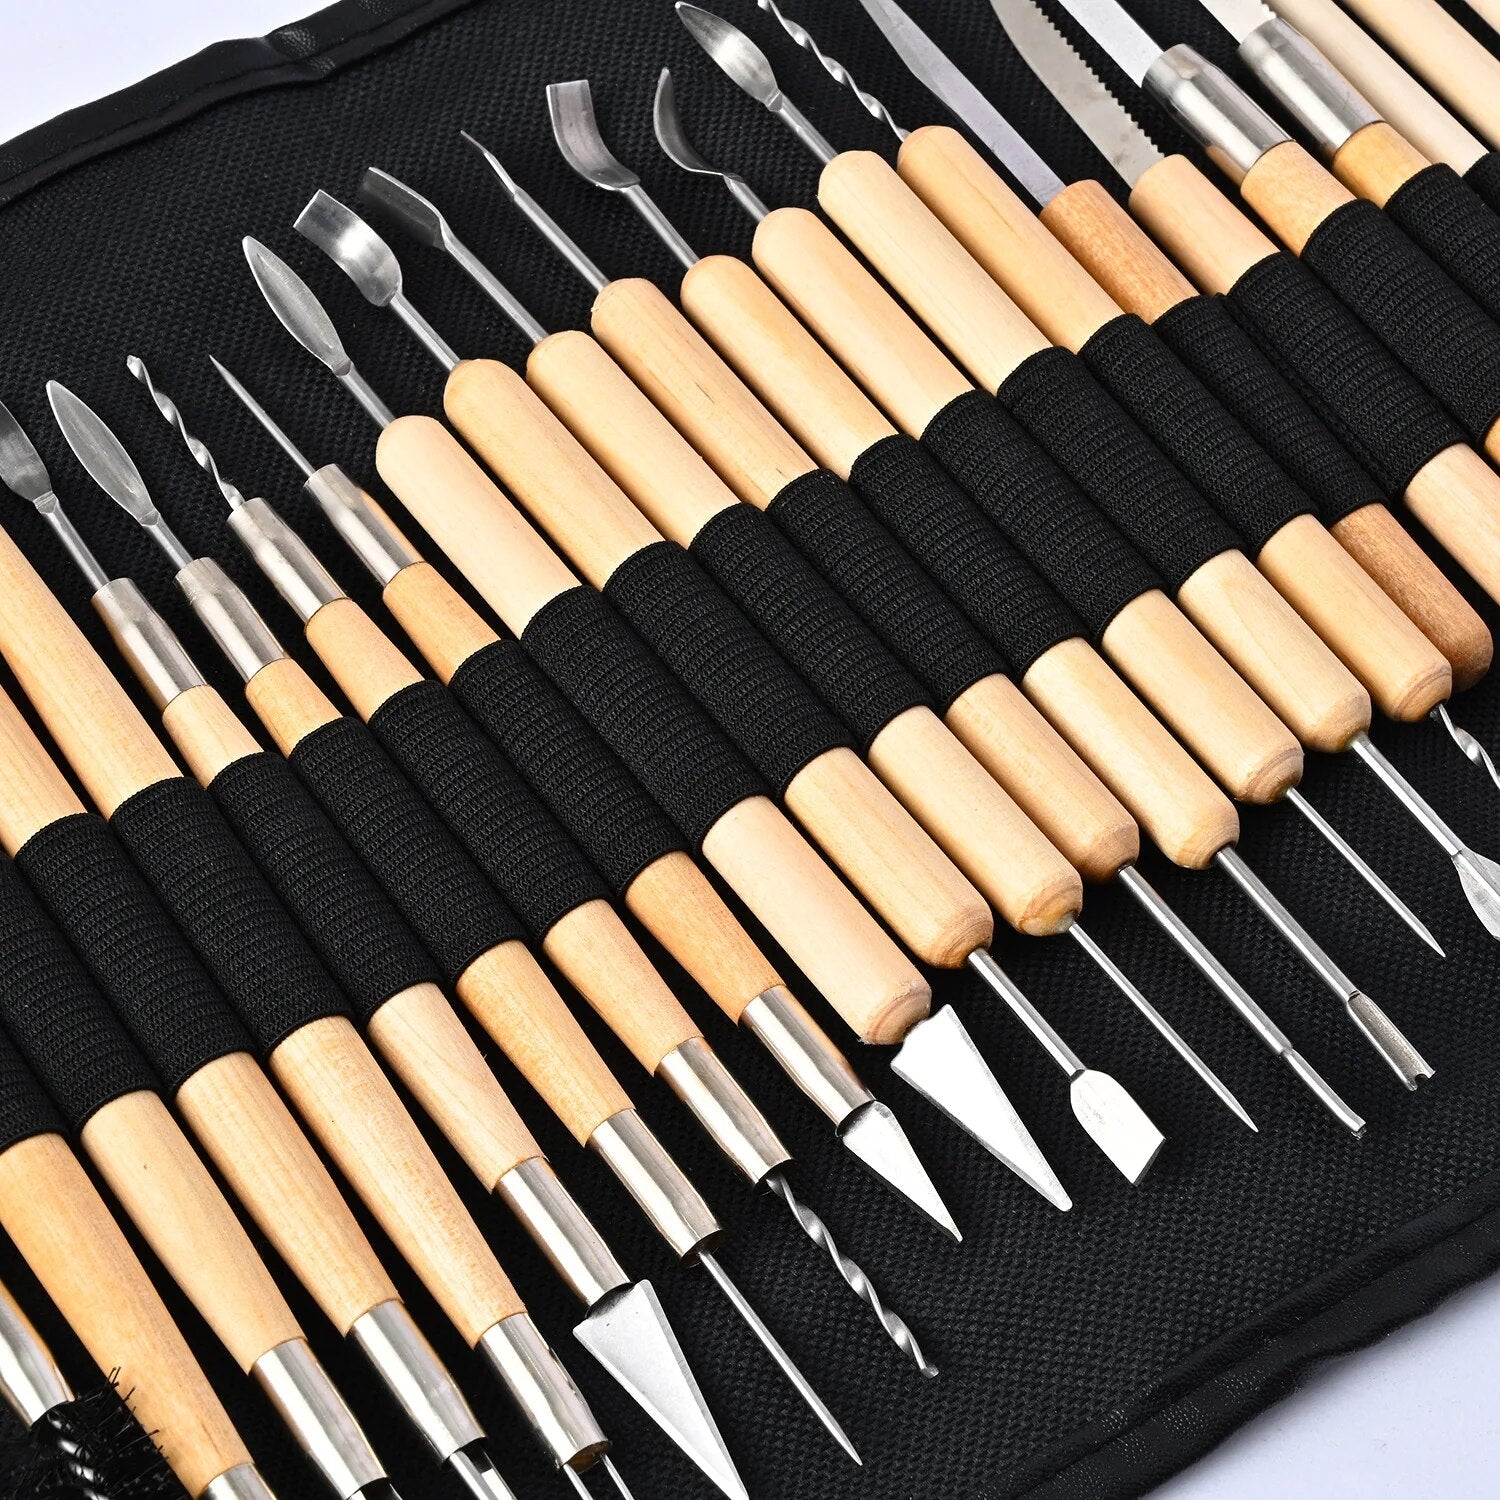 61pcs Set Pottery Clay Tools Modeling Carved Ceramic DIY Tool